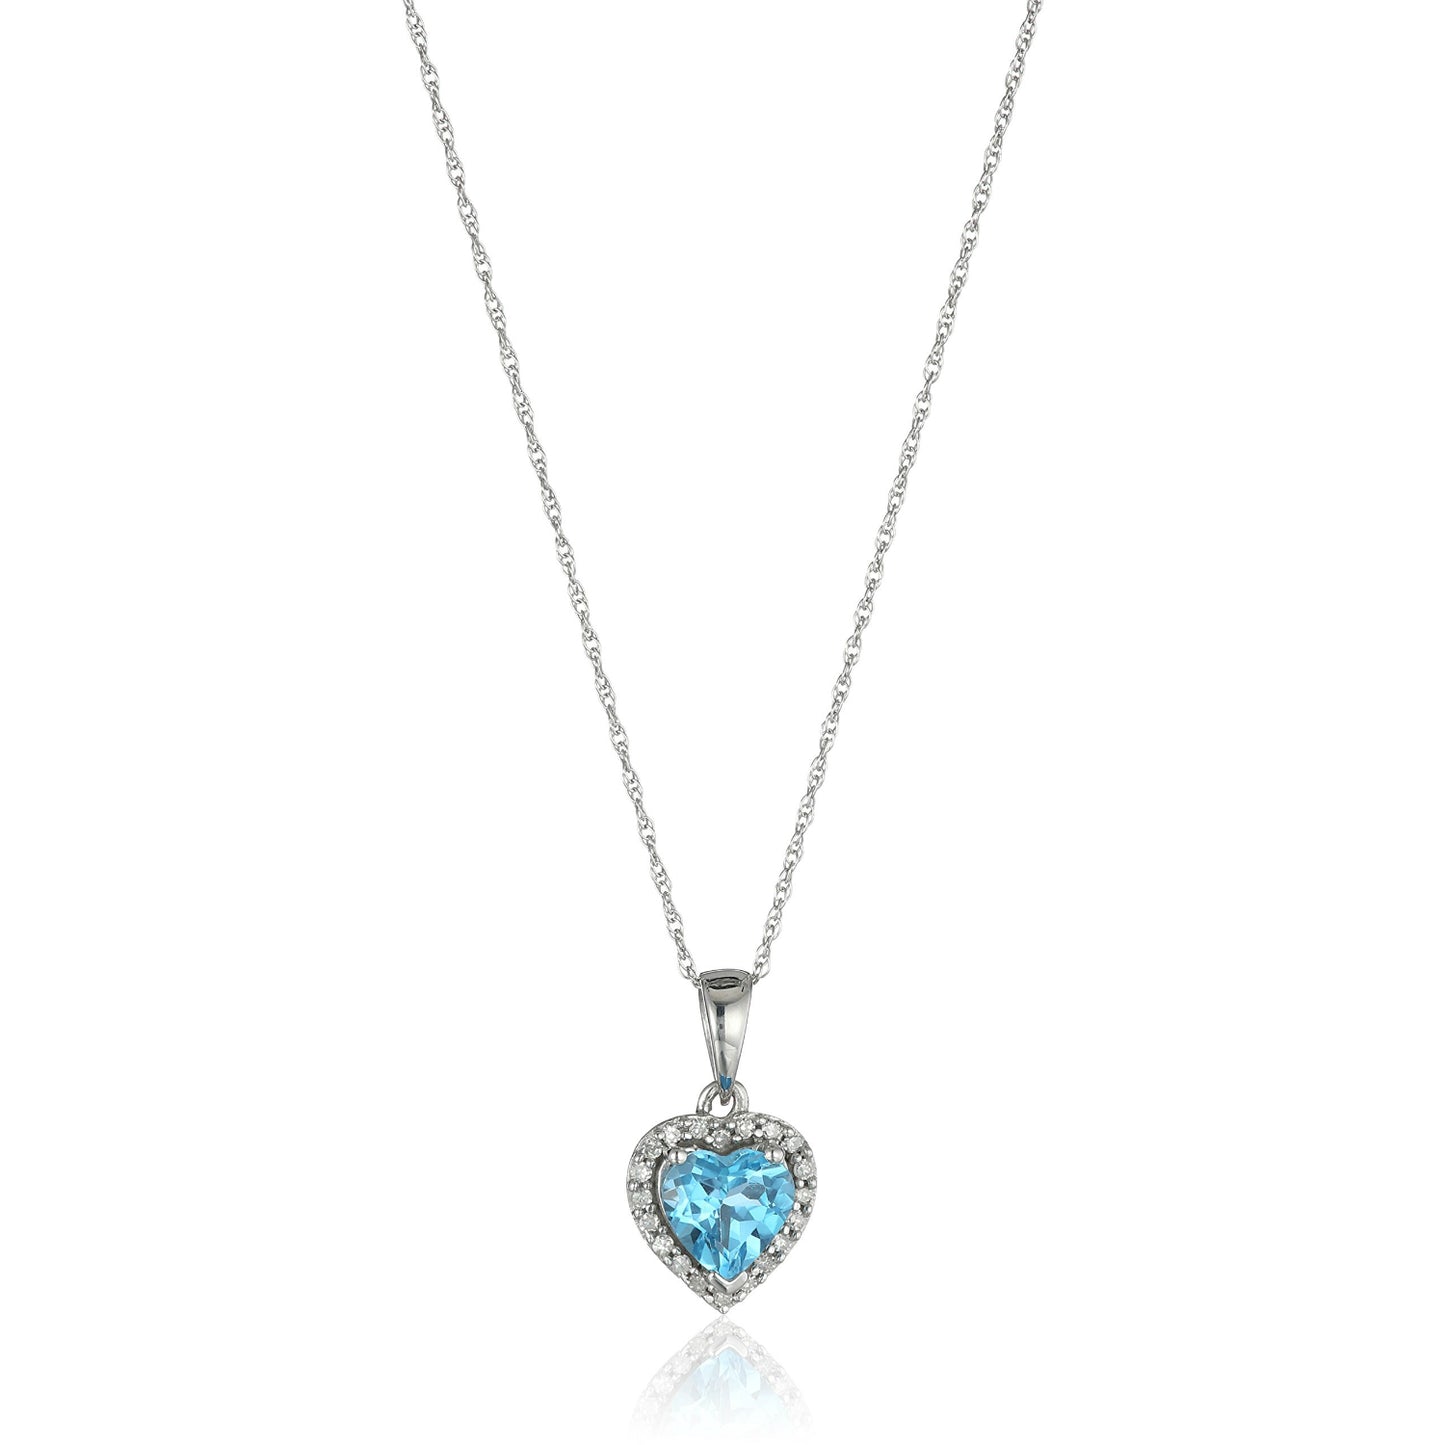 10k White Gold Swiss Blue Topaz Heart and Diamond Pendant Necklace, (1/10 cttw H-I Color, I1-I2 Clarity), 18" - pinctore